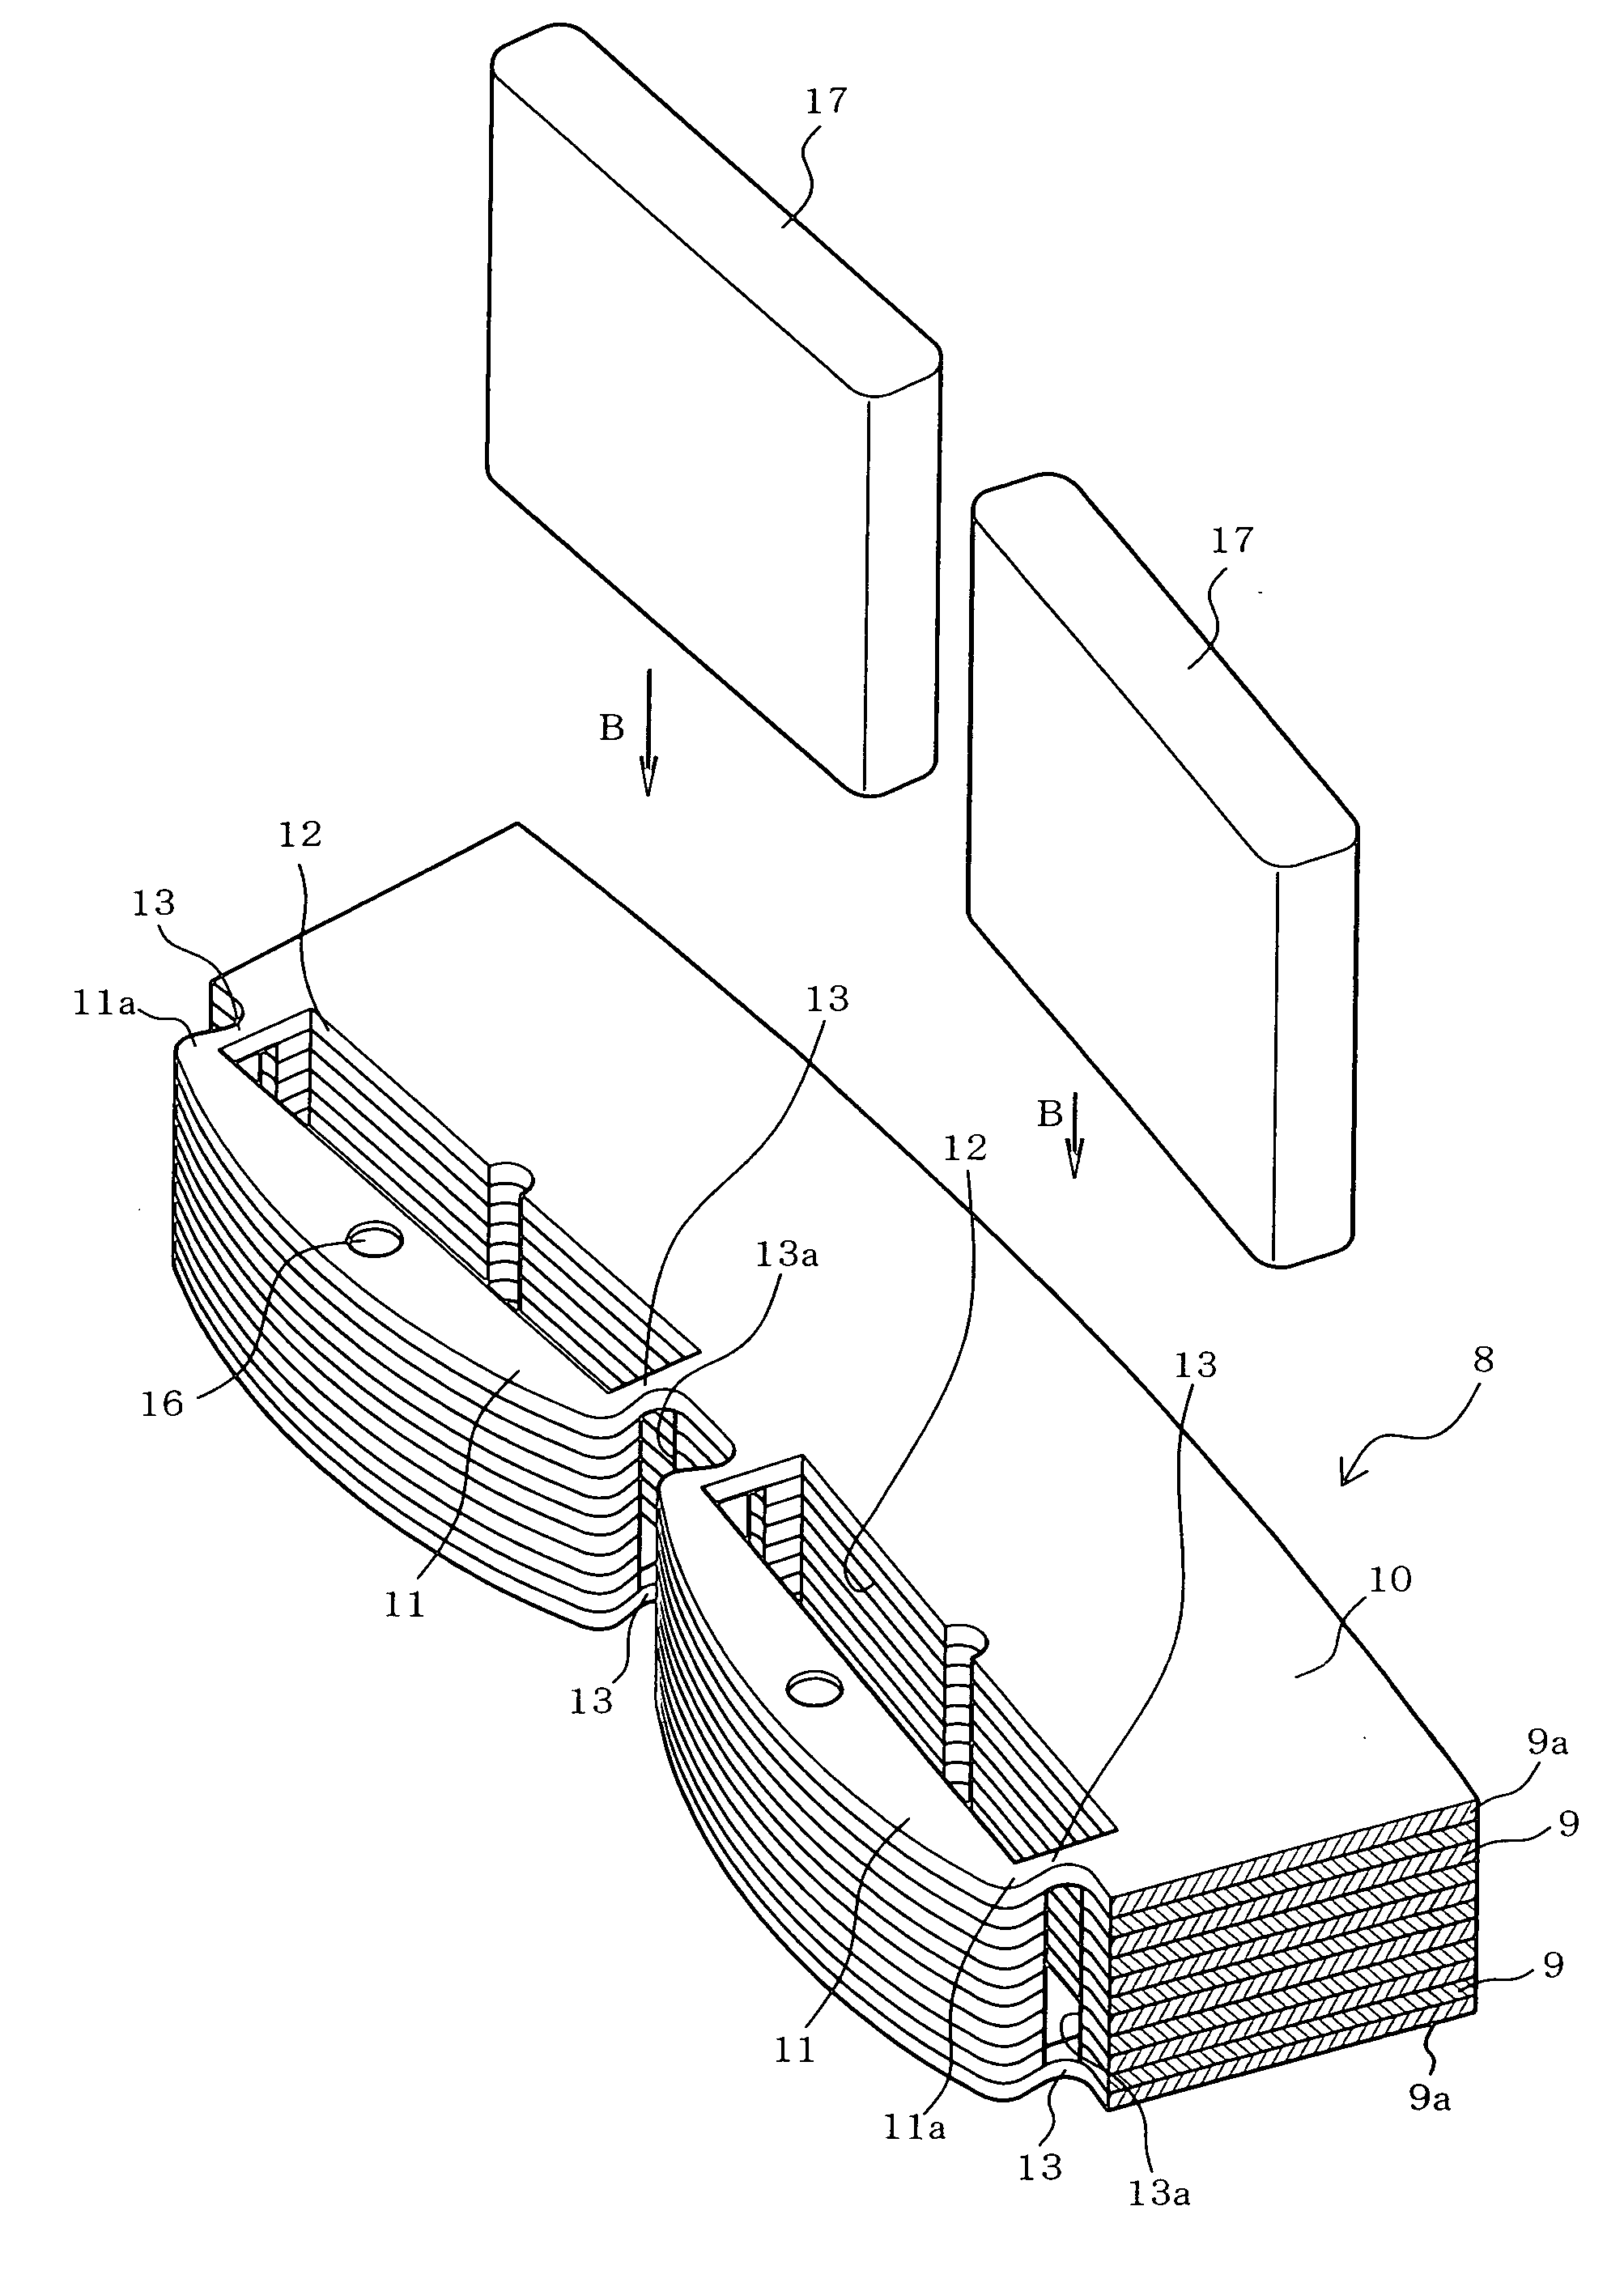 Rotor Core For Rotating Electrical Machine and Method of Manufacturing the Same